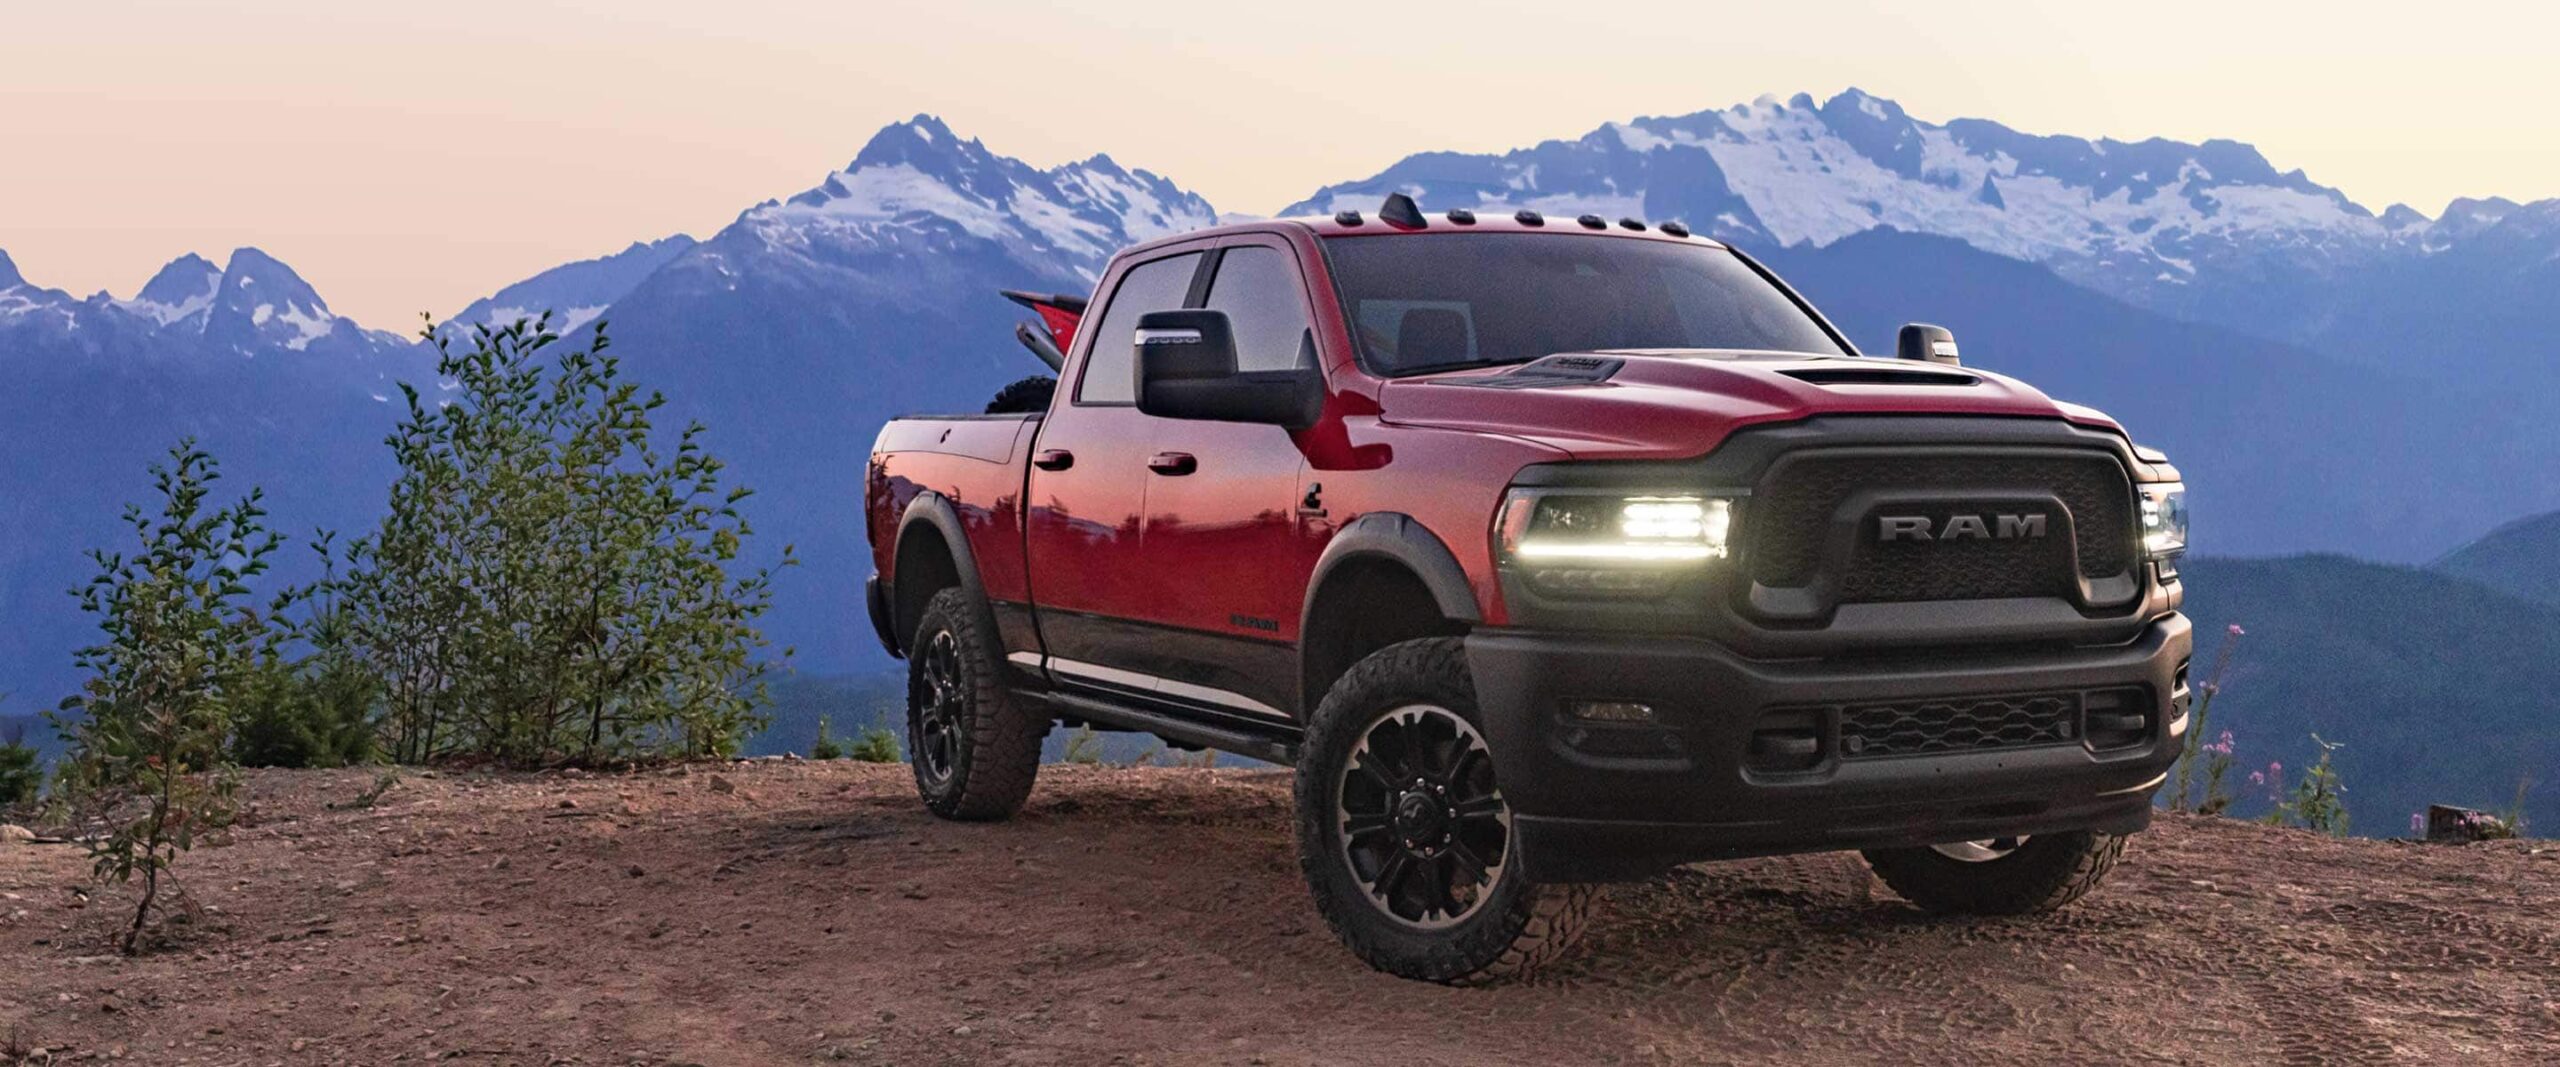 Unveiling the stunning Ram Delmonico with its captivating red paint code.